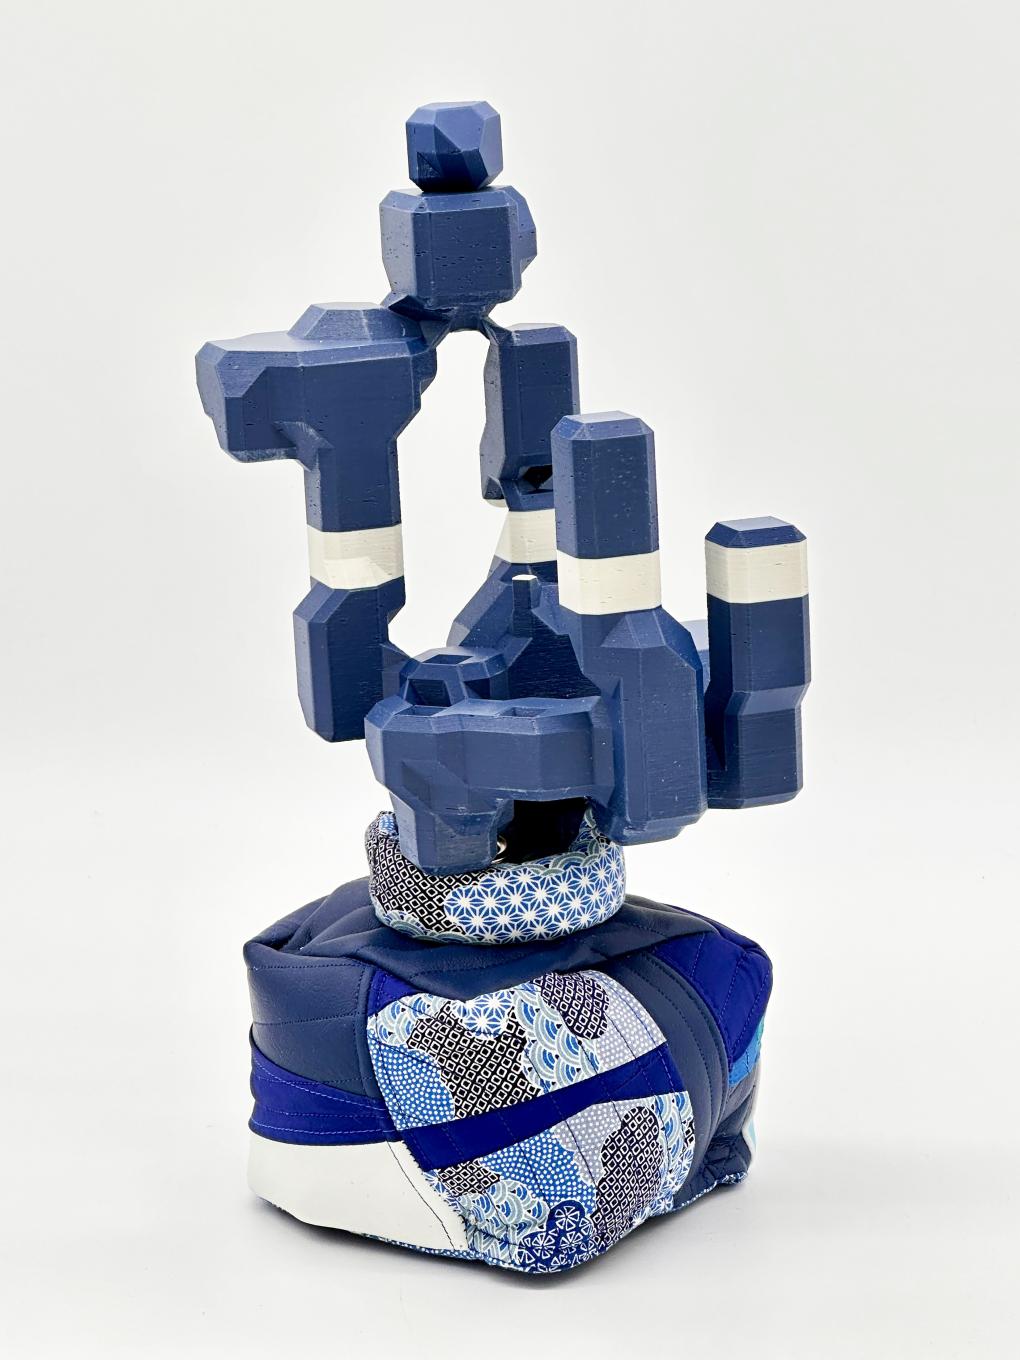 A blue and white 3D-printed sculpture in a fabric base casing.